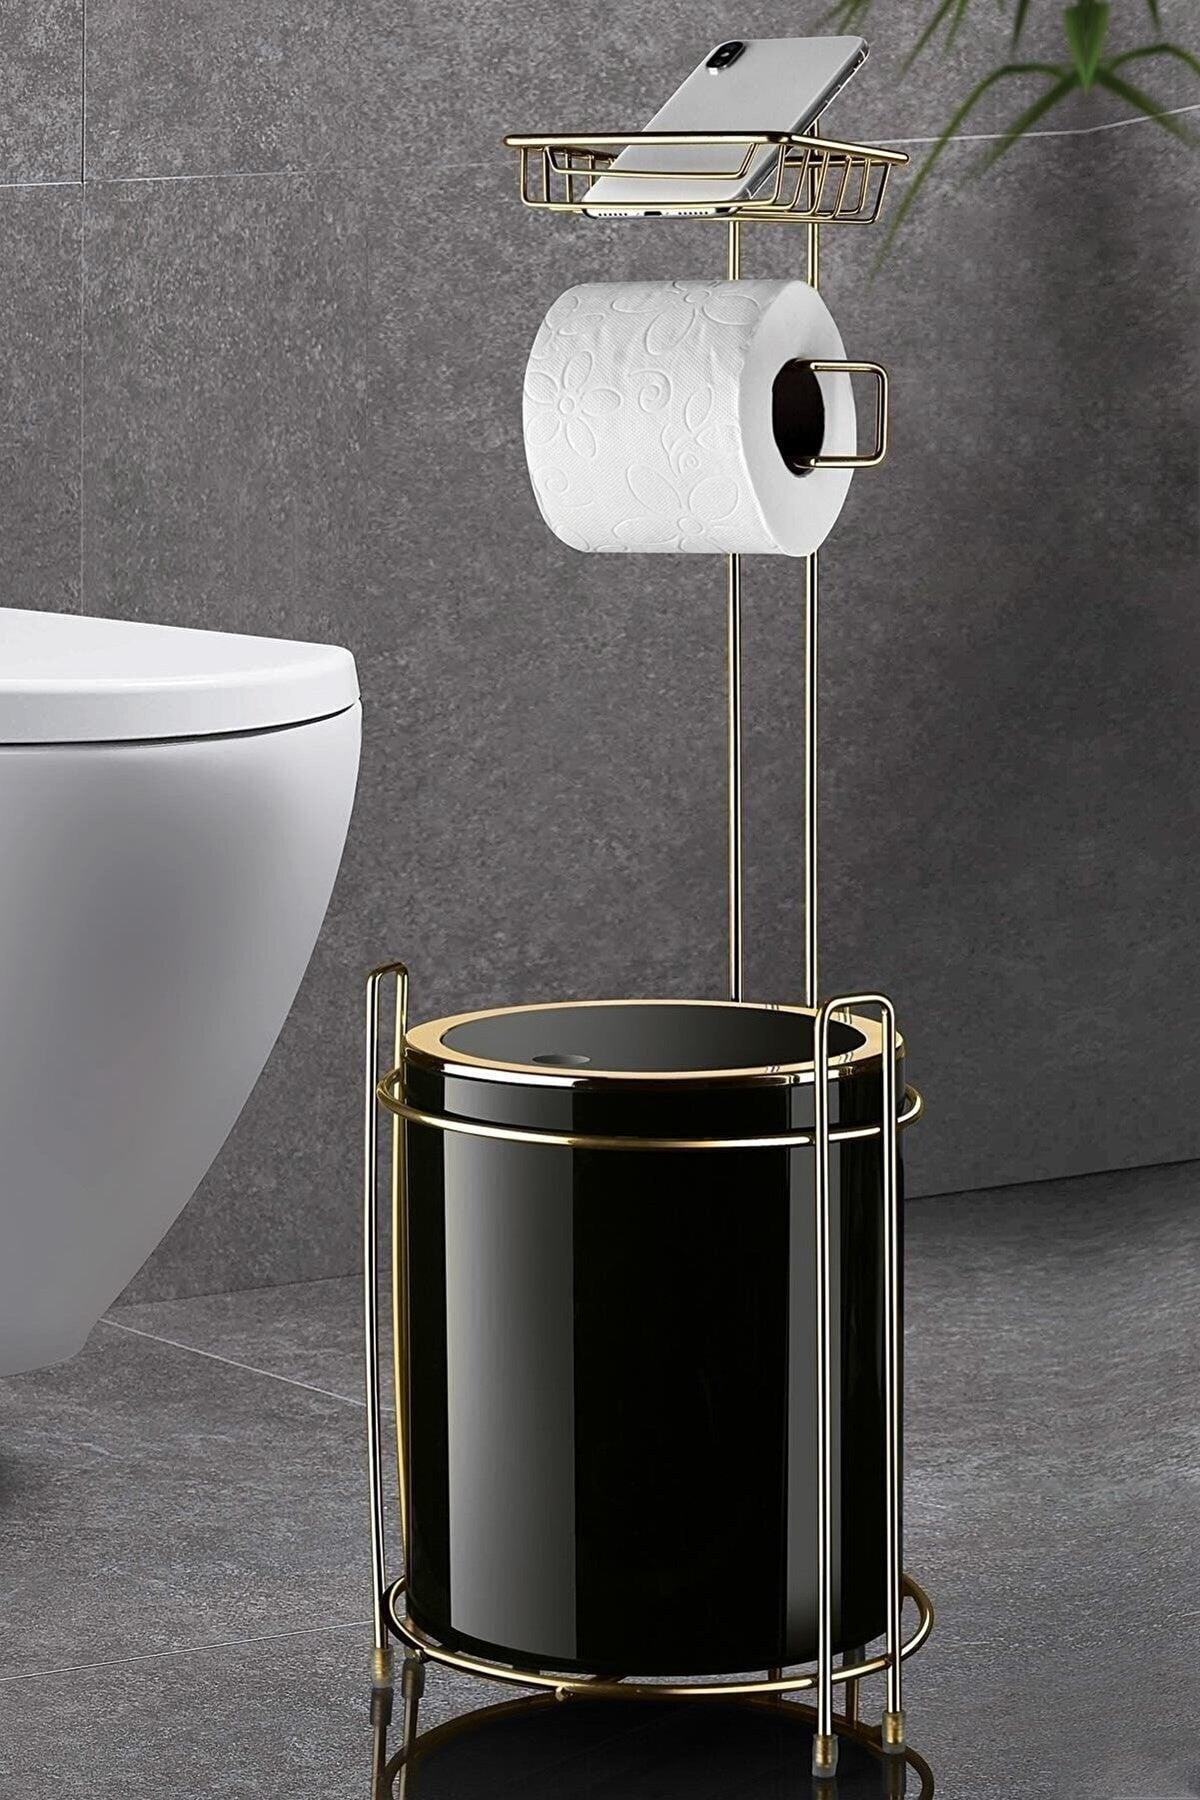 Gold Backed Wc Paper Holder And Round Black